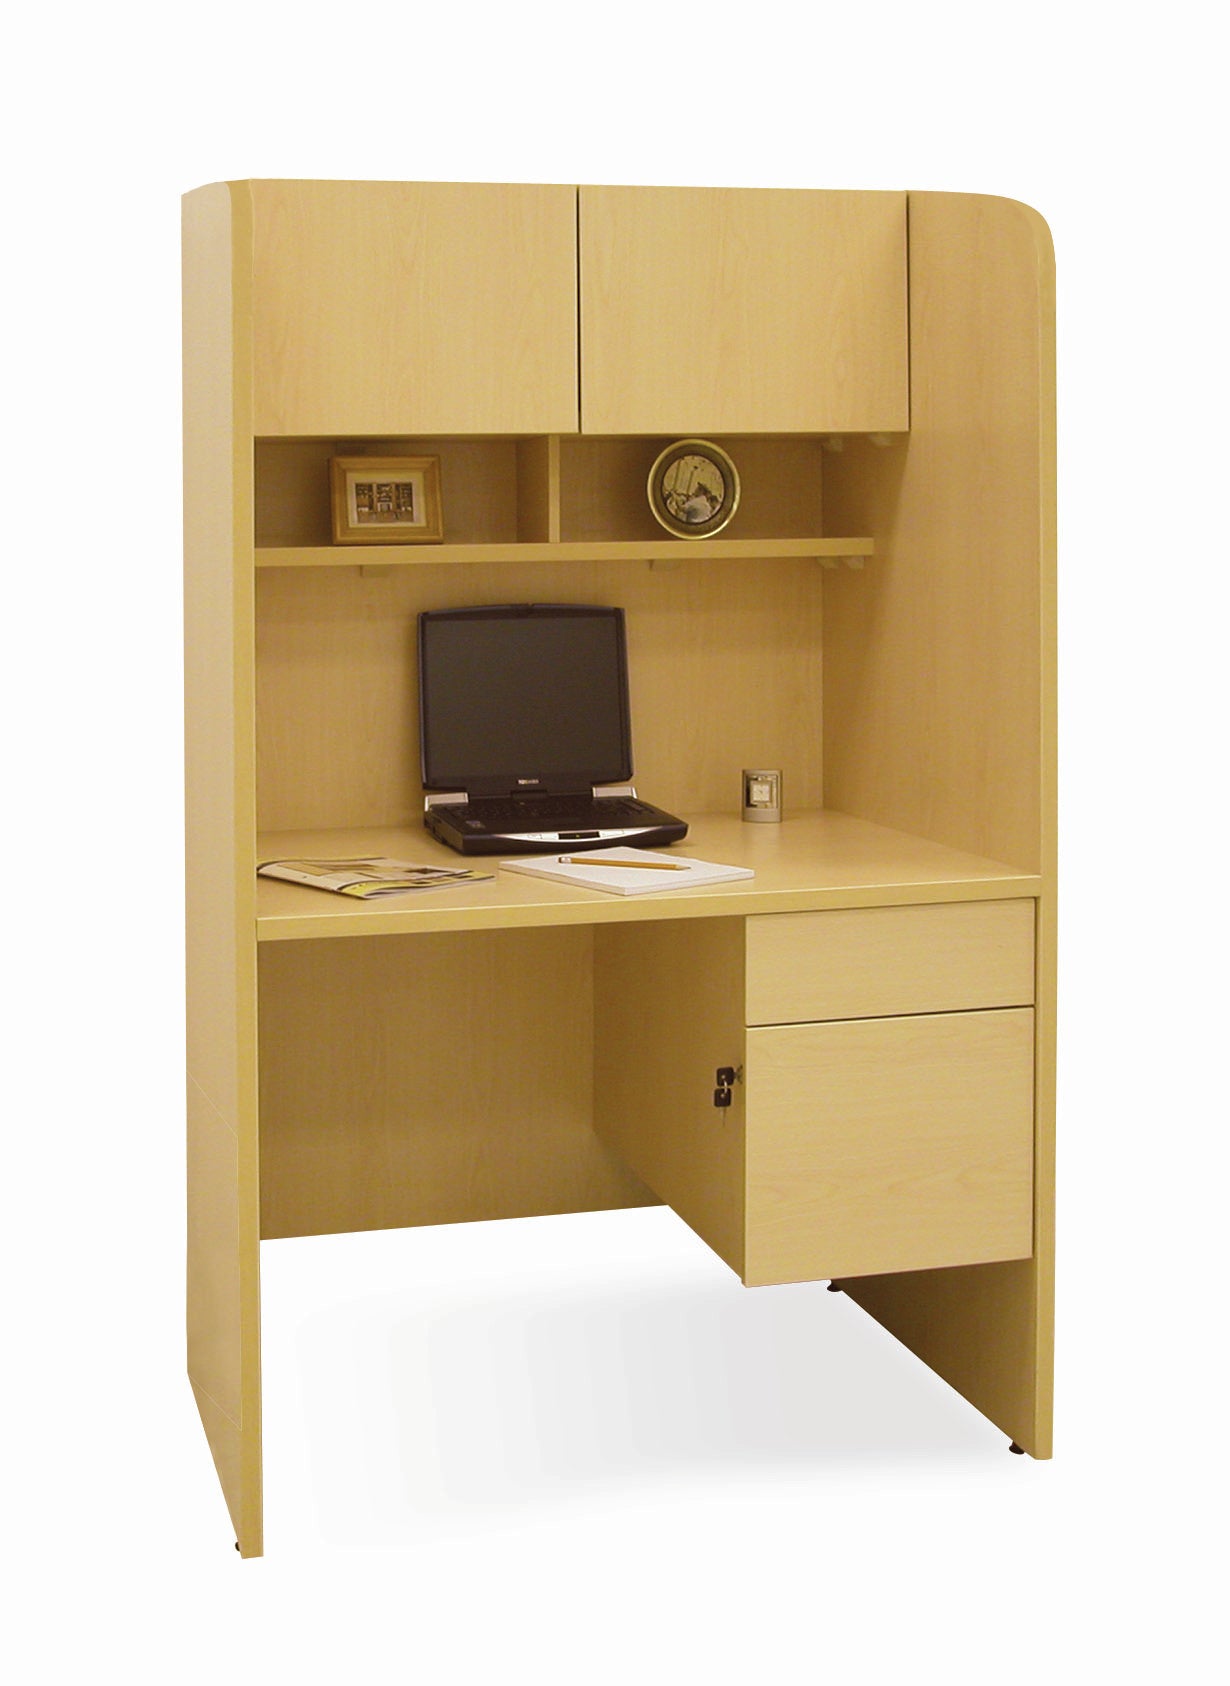 CA615-2 - Economy Cubicle  Privacy Station  by Candex